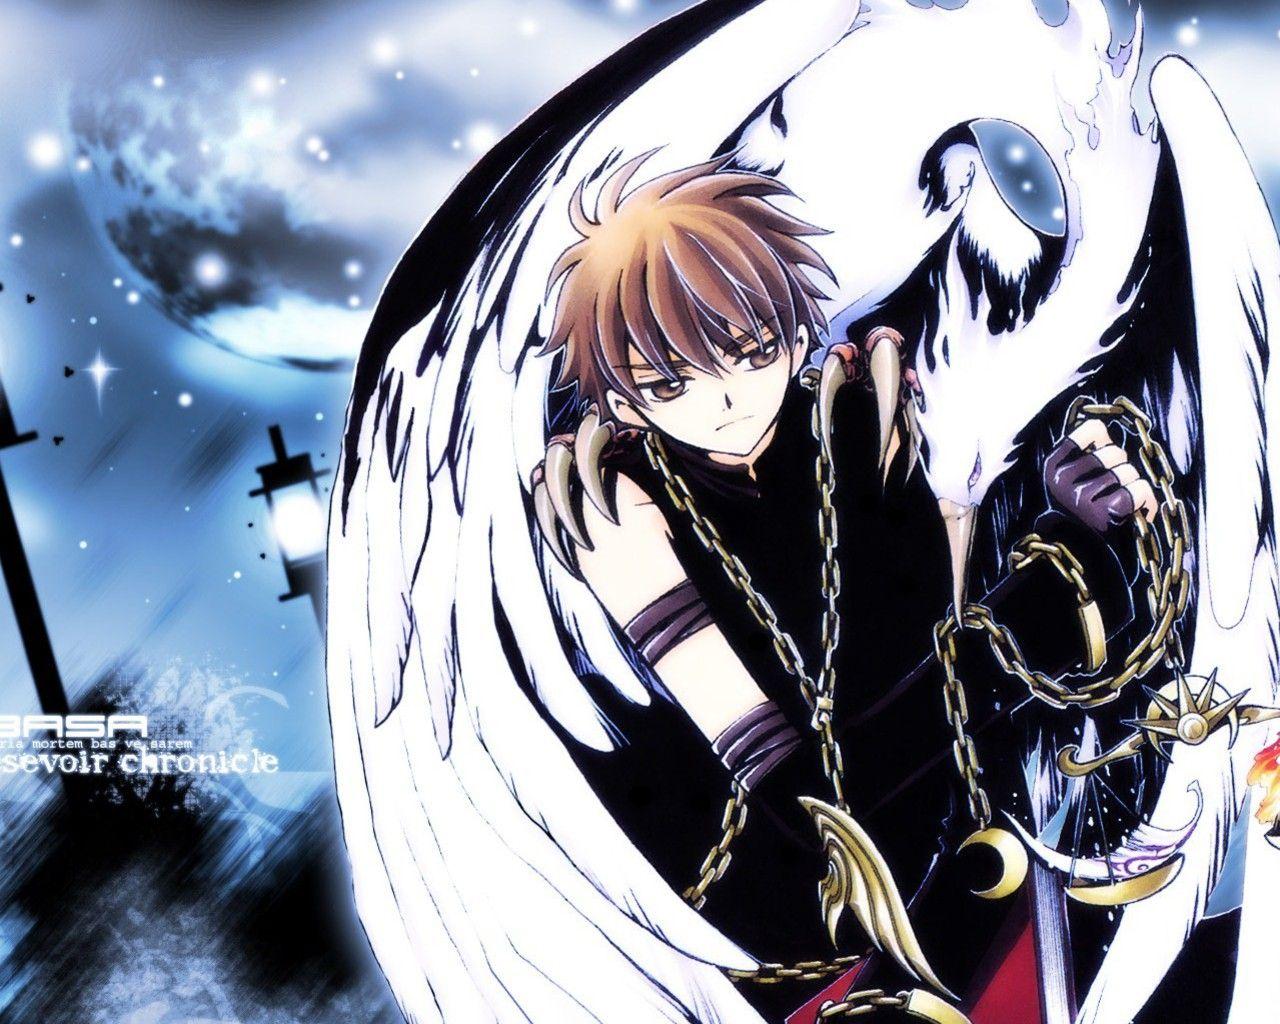 Cool Anime Wallpapers - Top Free Cool Anime Backgrounds ...